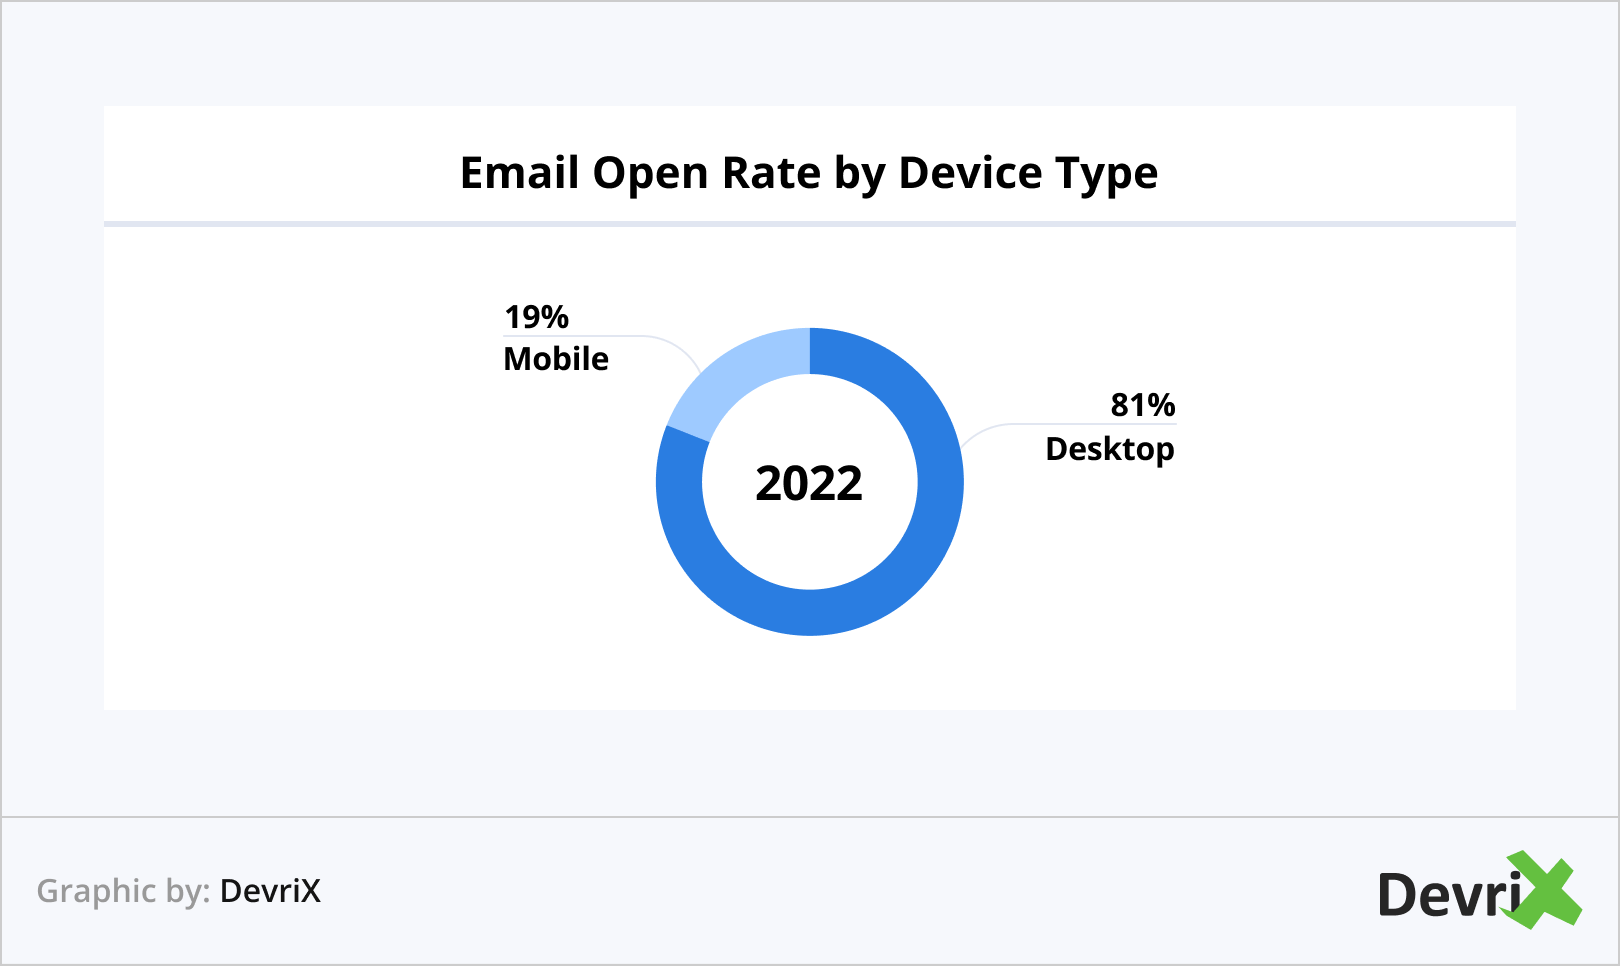 Email Open Rate by Device Type